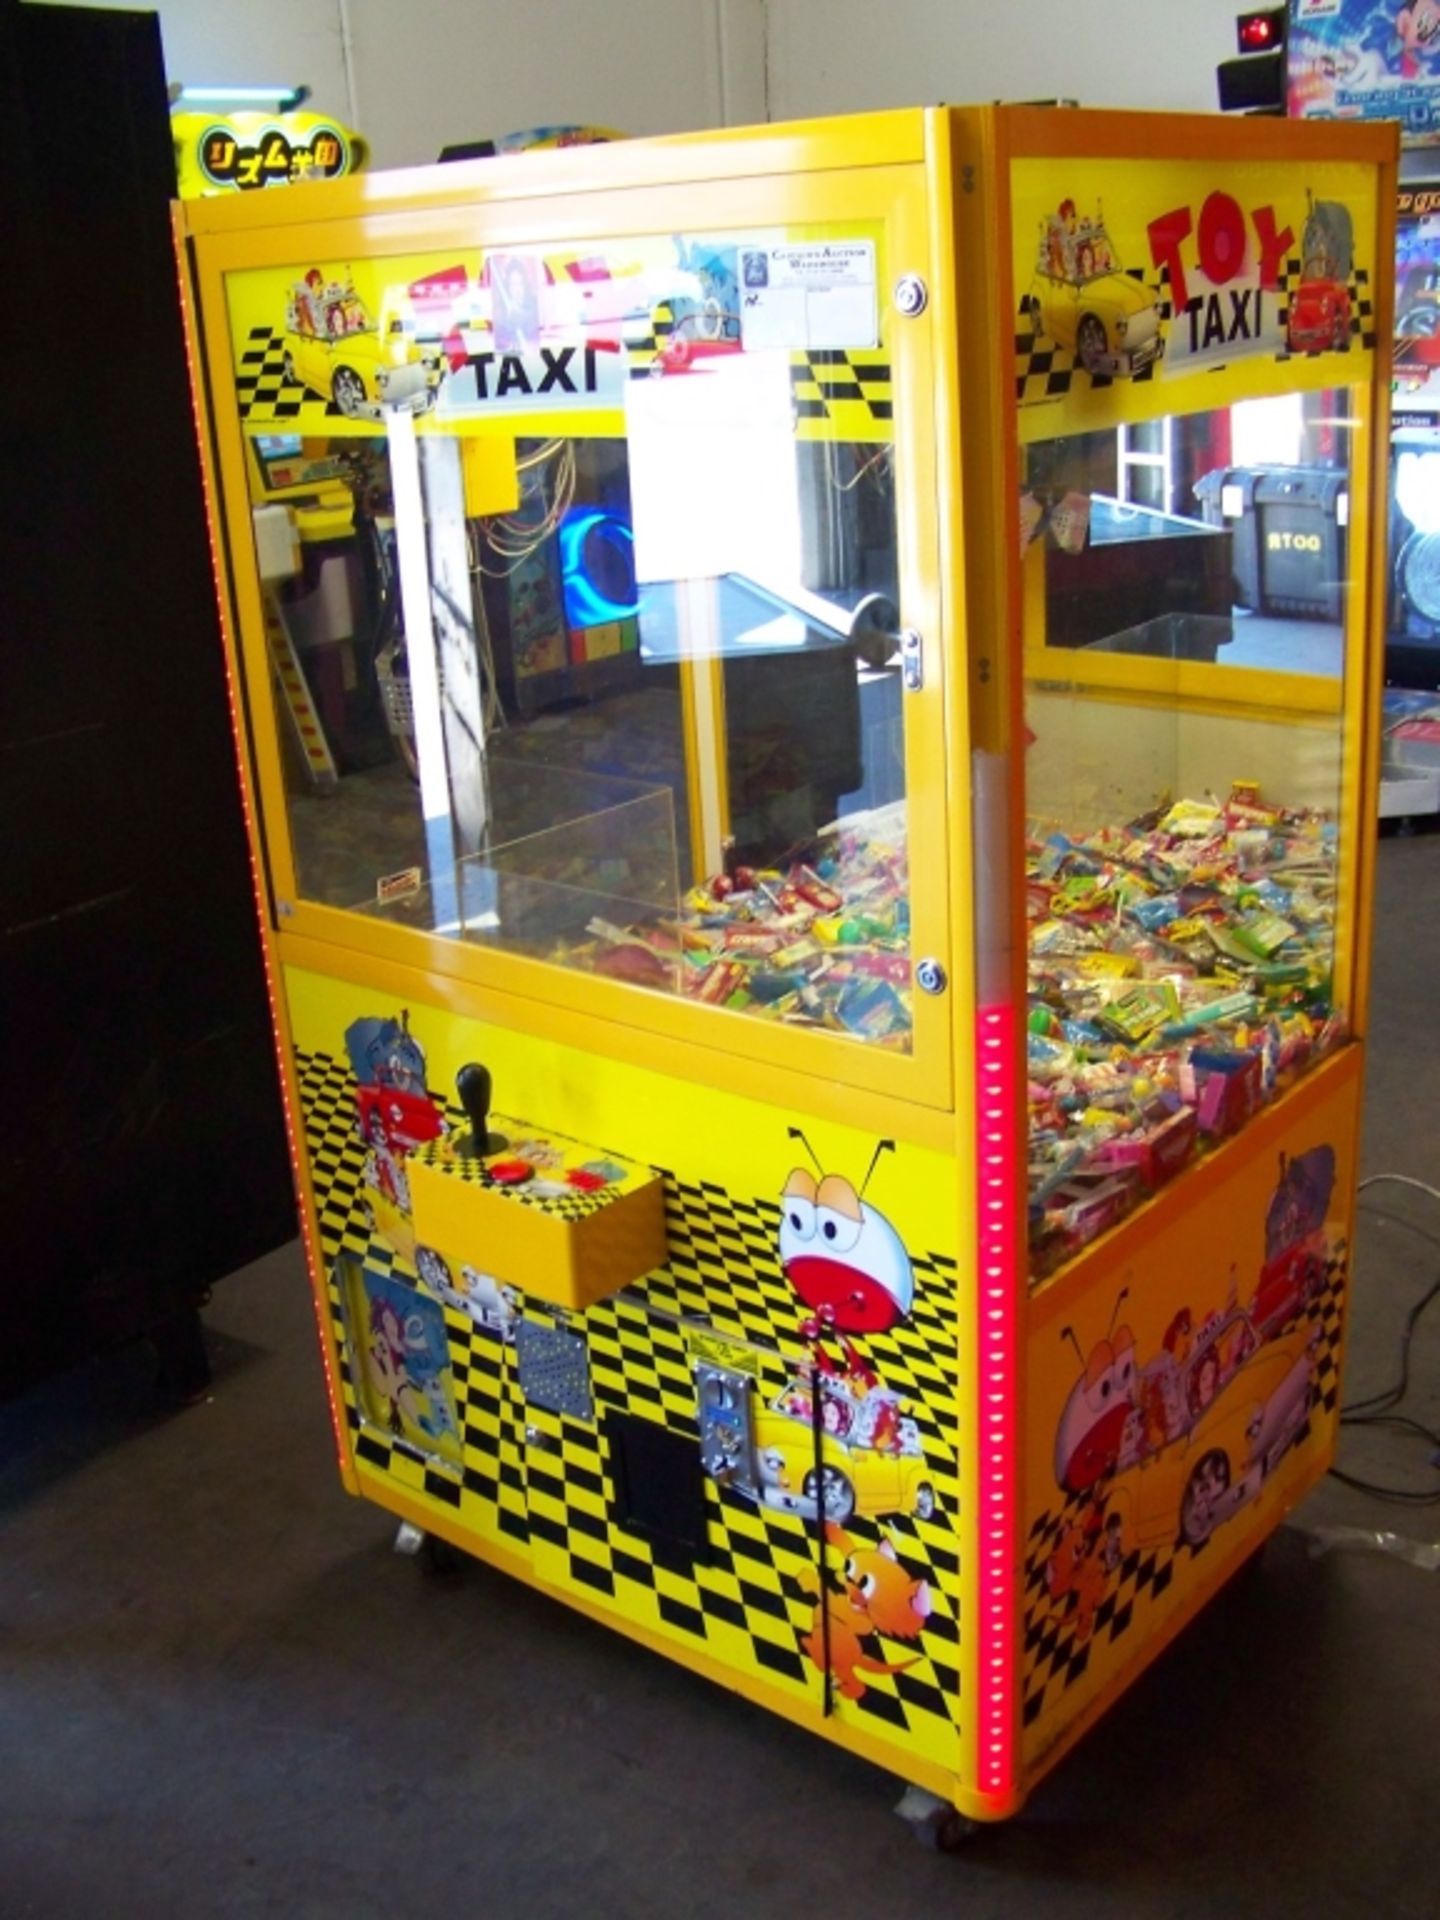 42" TOY TAXI MINI SIZE CANDY CLAW CRANE MACHINE - Image 3 of 4